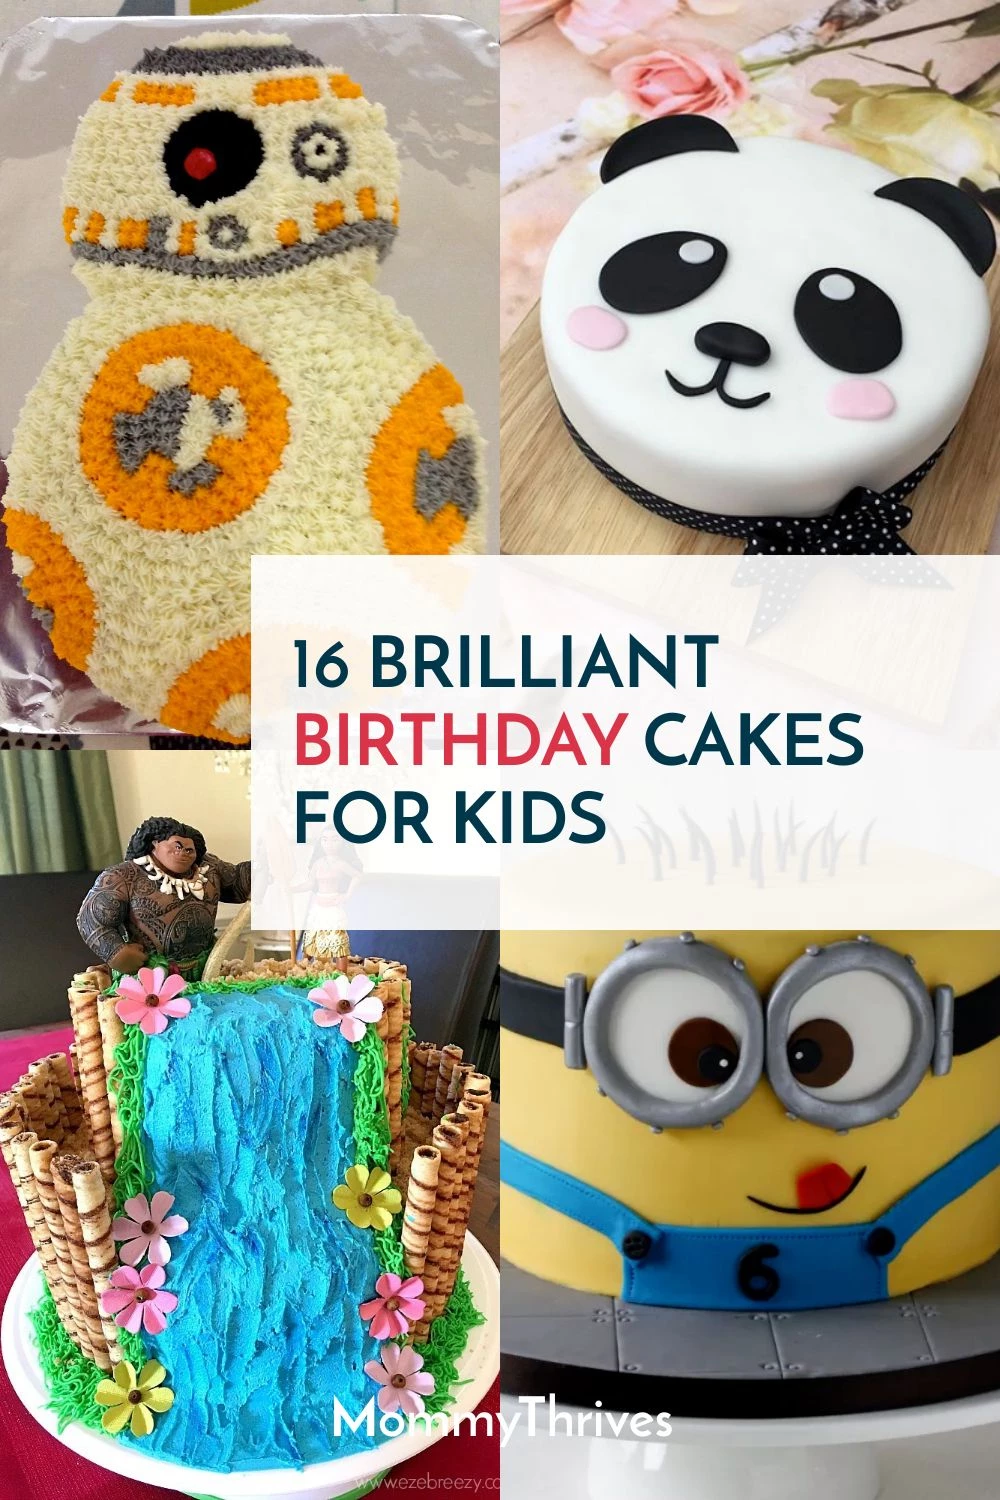 27 Adorable Ideas for Cakes for Baby's First Birthday | Kids Activities Blog